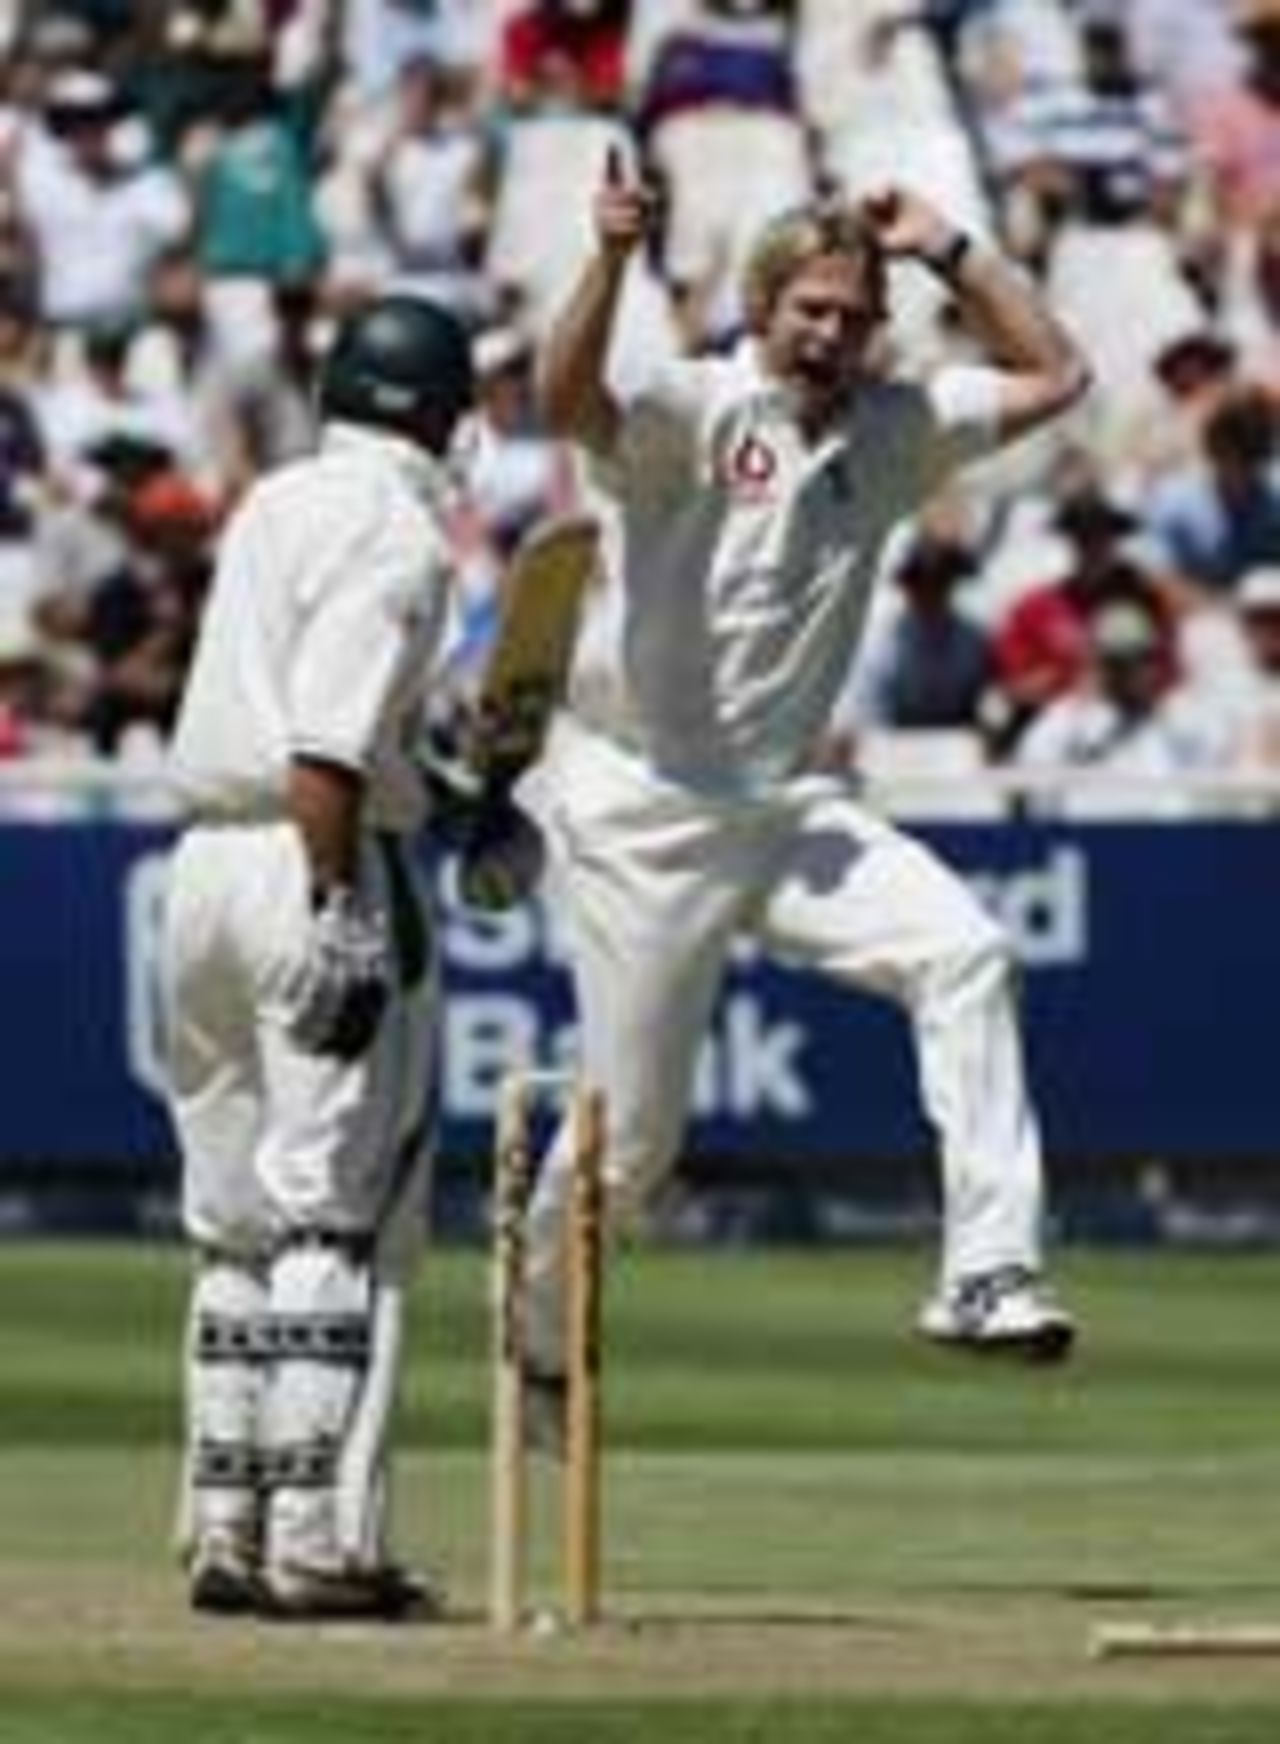 Herschelle Gibbs is bowled out by Matthew Hoggard, South Africa v England, 3rd Test, Cape Town, 1st day, January 2, 2005